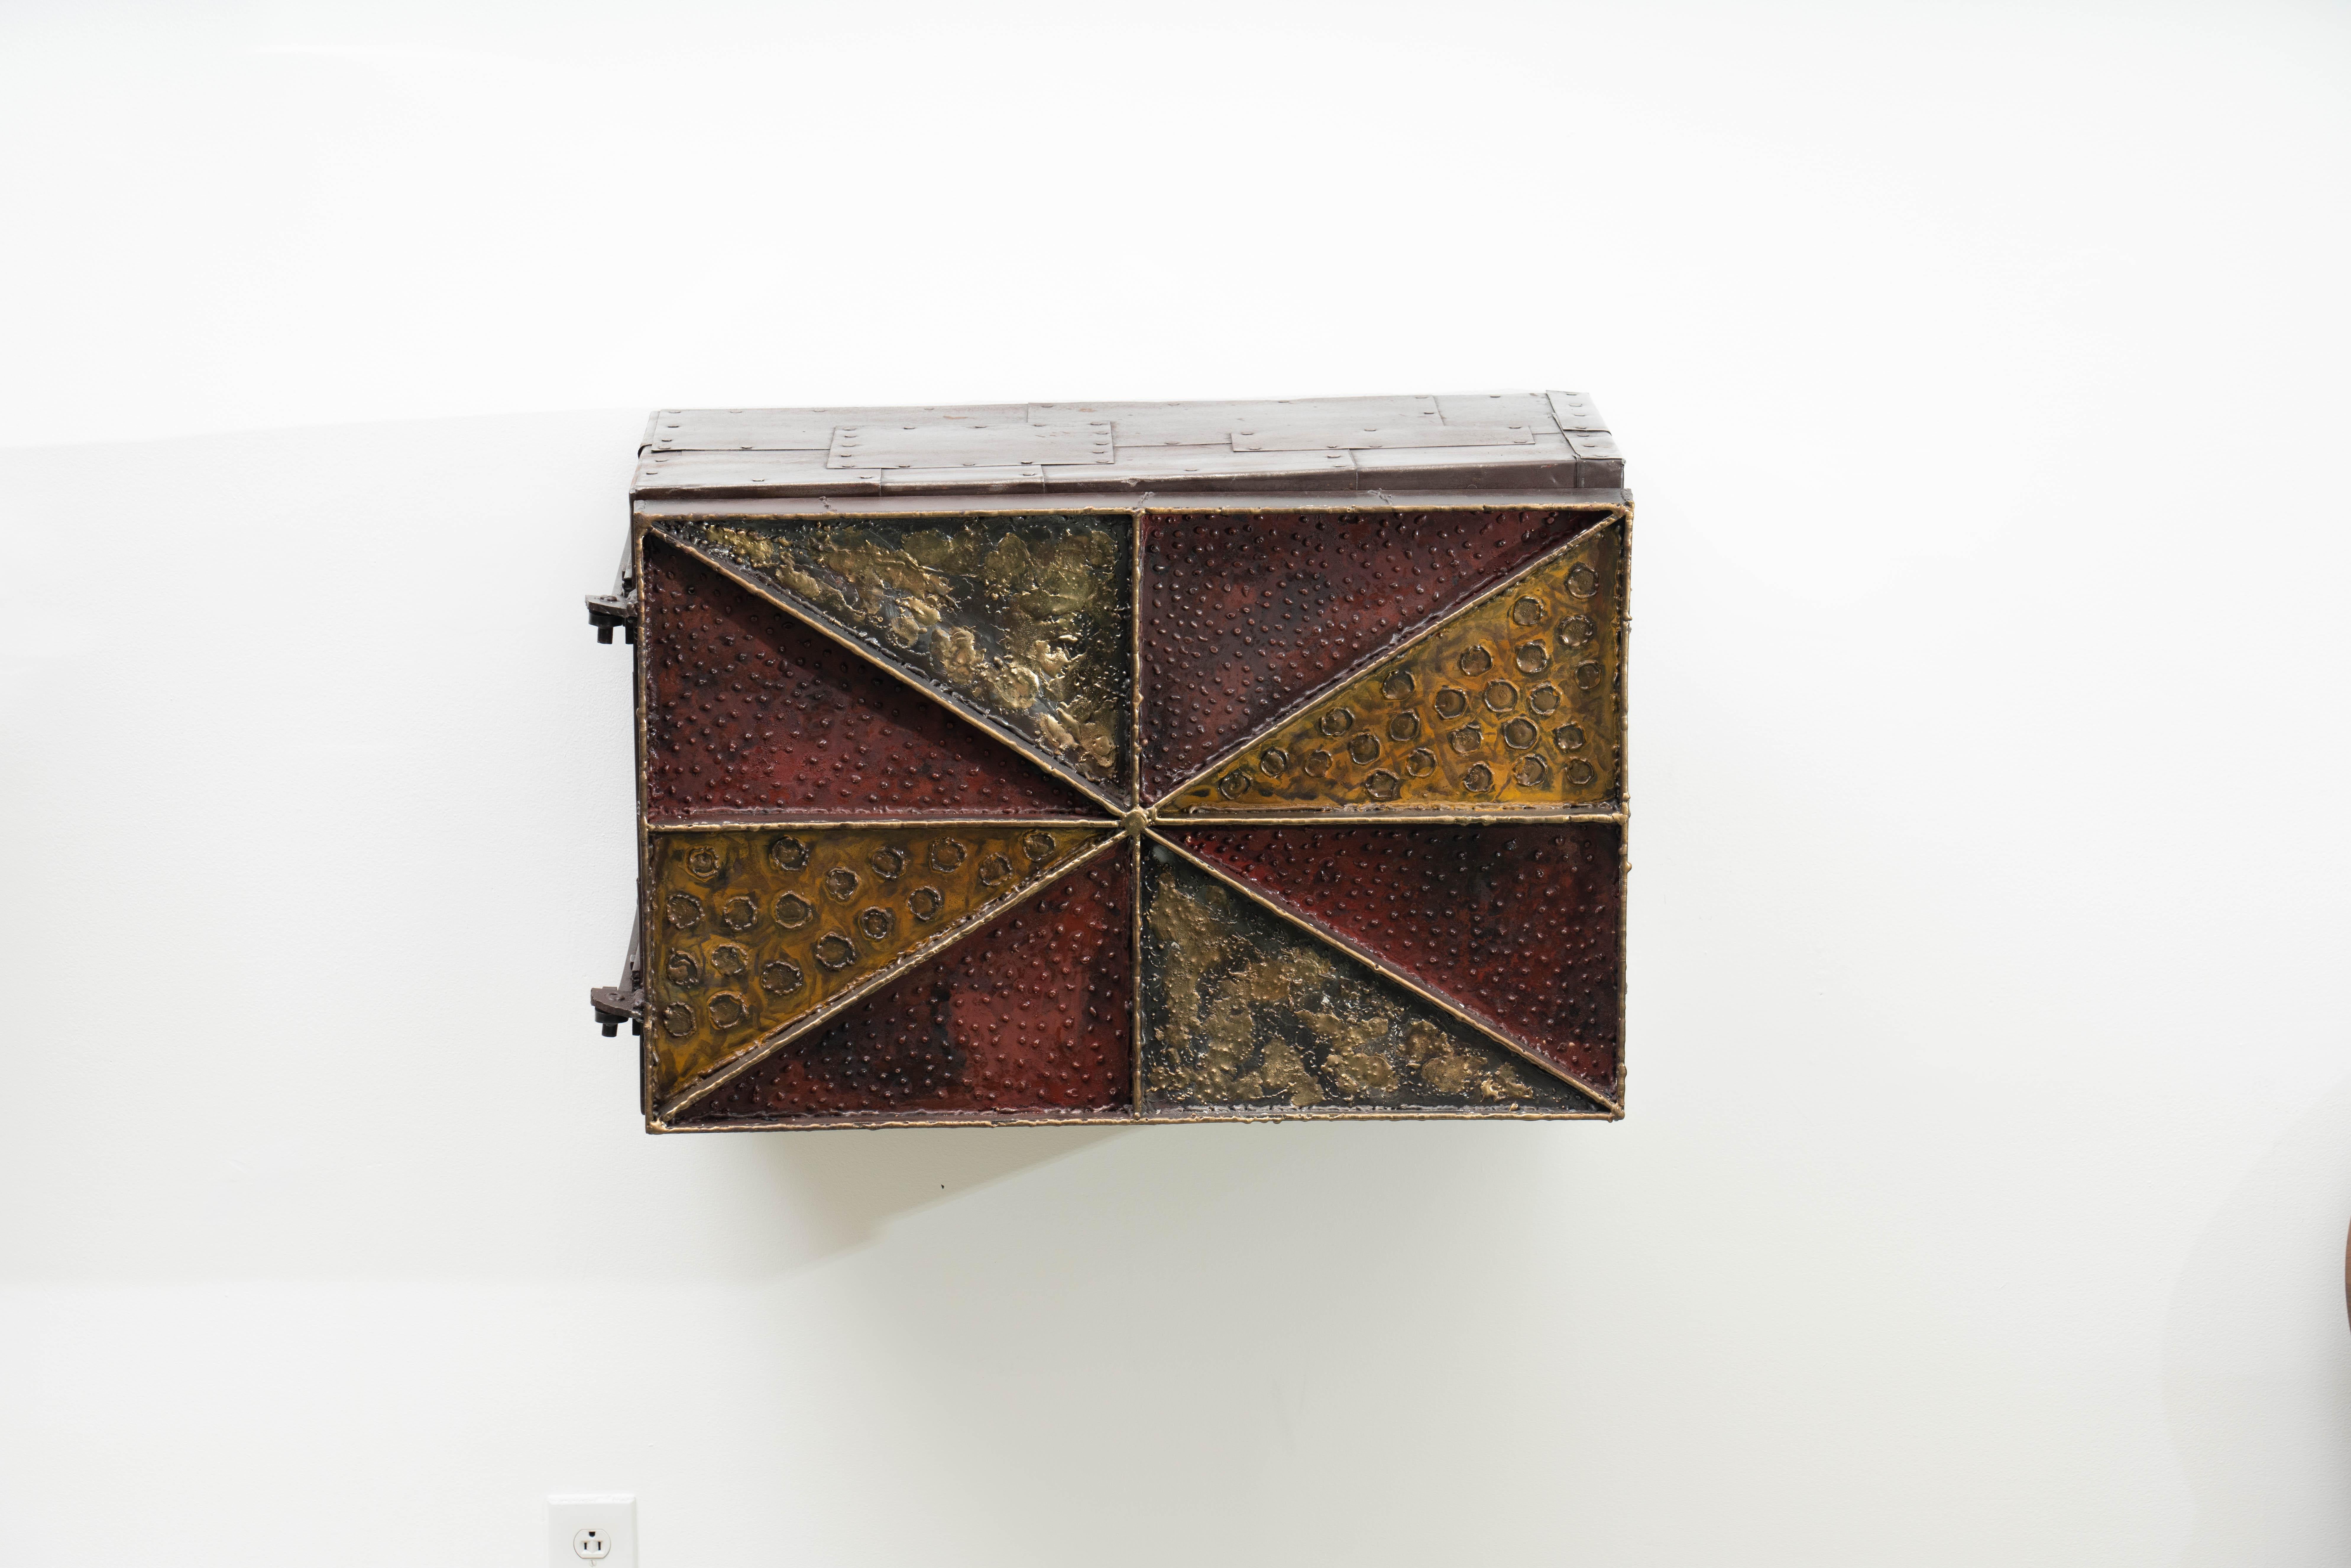 Despite the accessible size and lively surface decoration, very few of this style cabinet were produced by the Paul Evans Studio. With the same welded steel frame in a radial diamond pattern and patchwork steel sides, each were individually